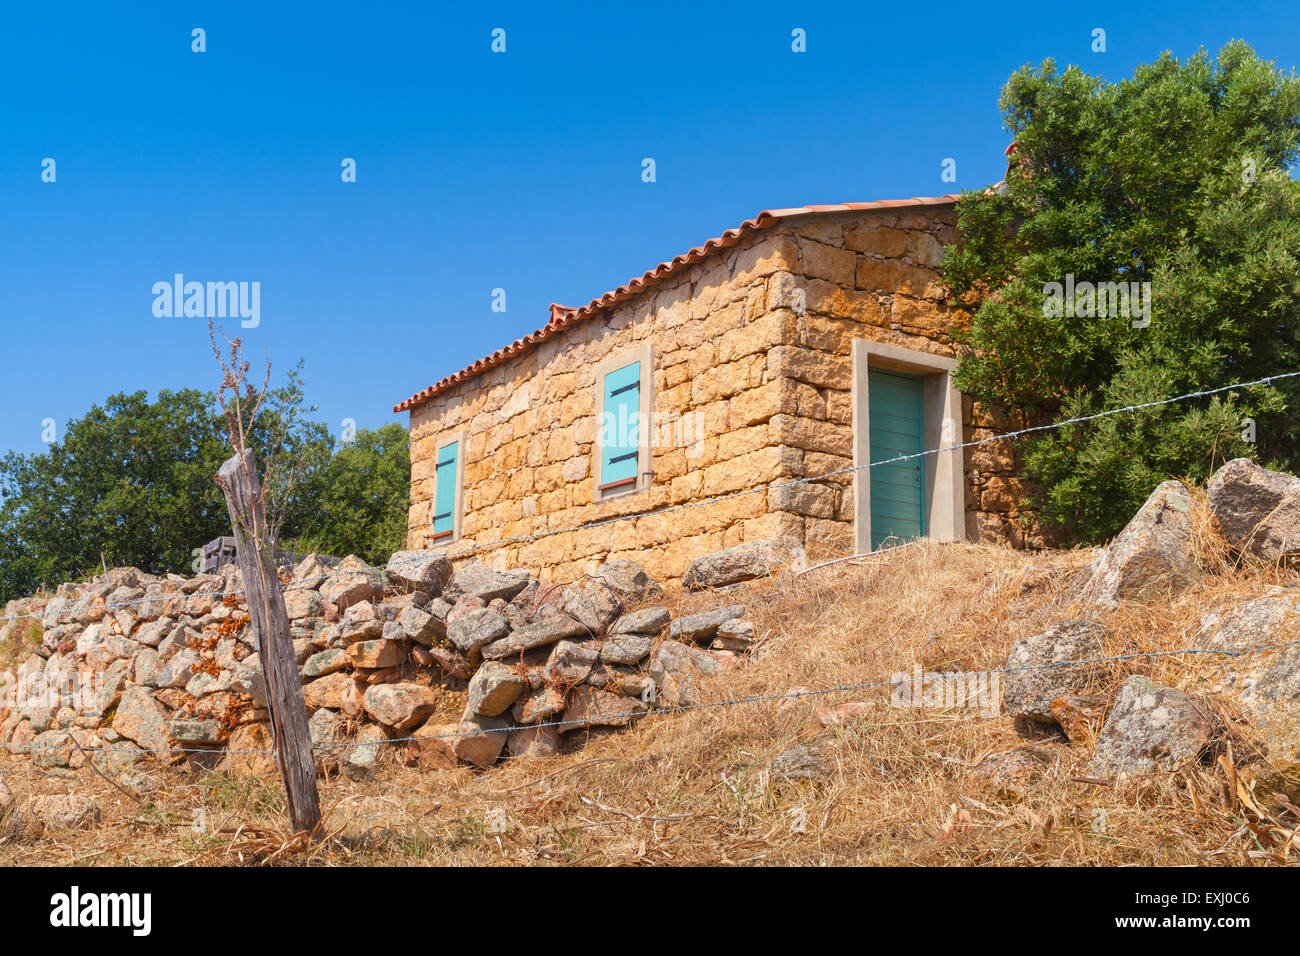 Typically rural landscape of South Corsica, France. Old stone house and trees Stock Photo